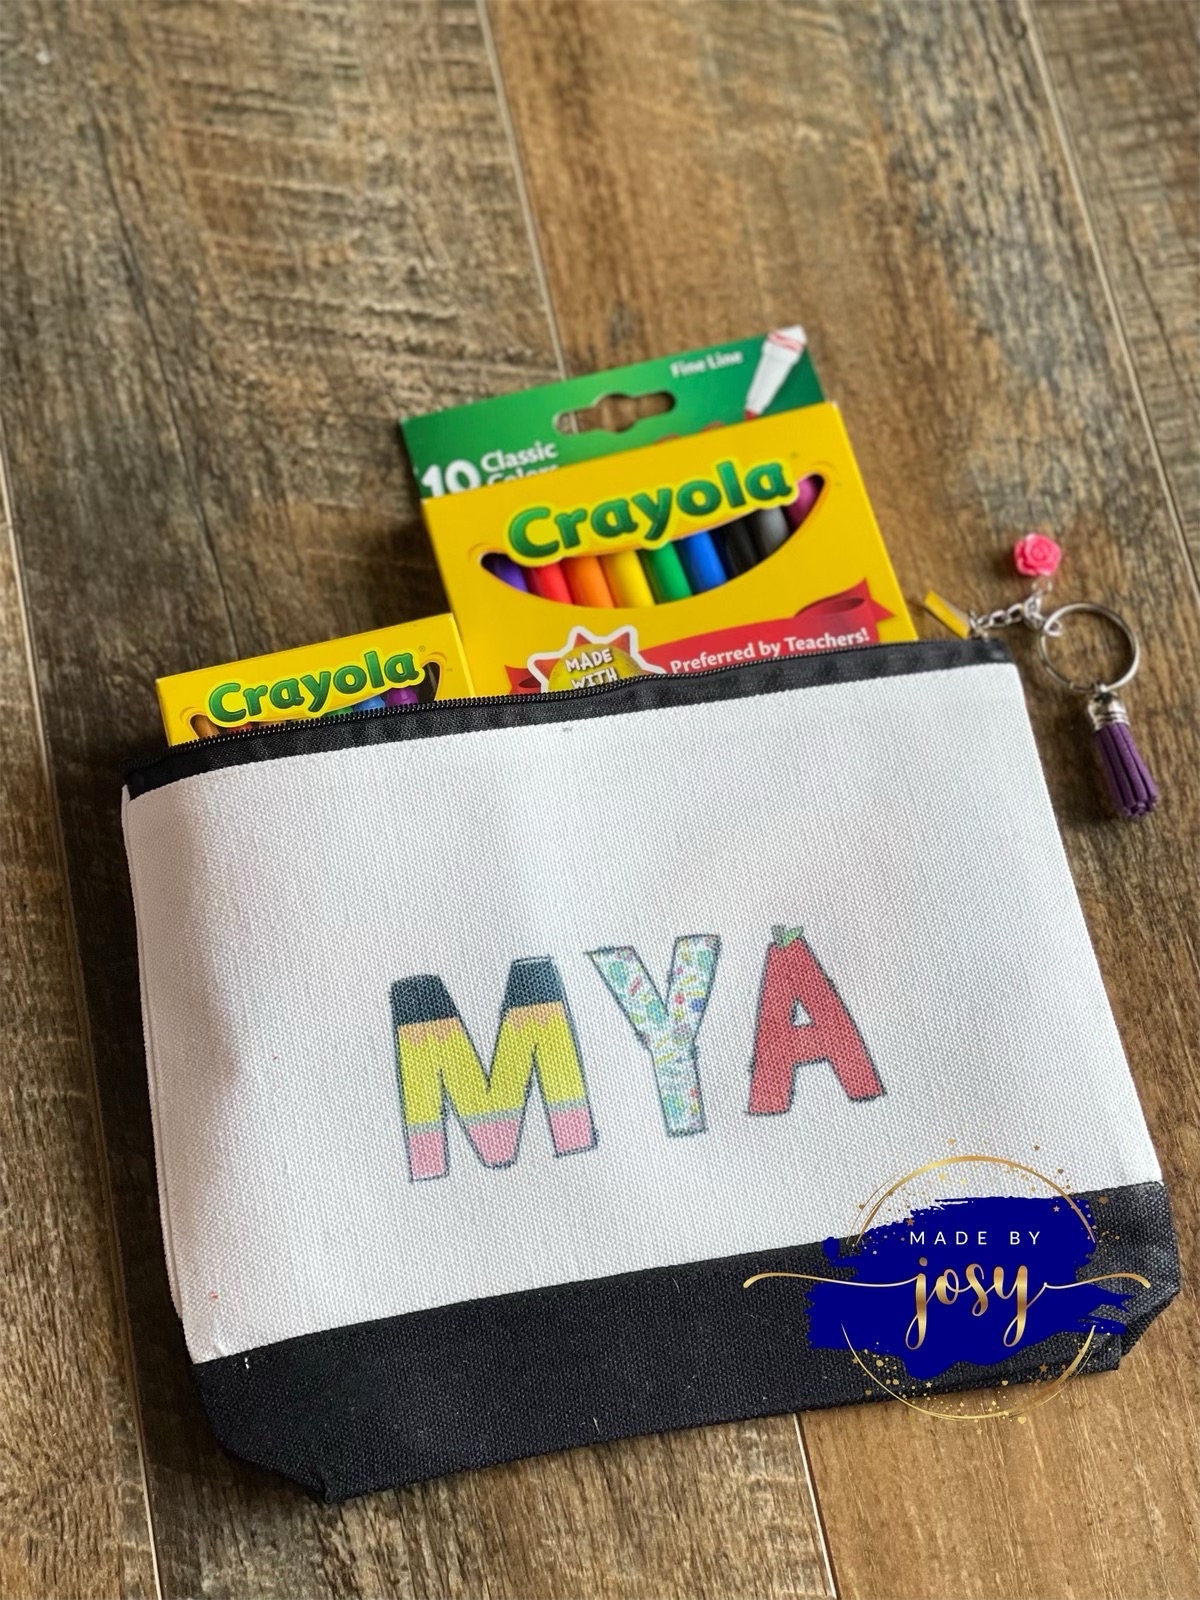 Personalized Kids Zippered Pencil Bags – A Gift Personalized